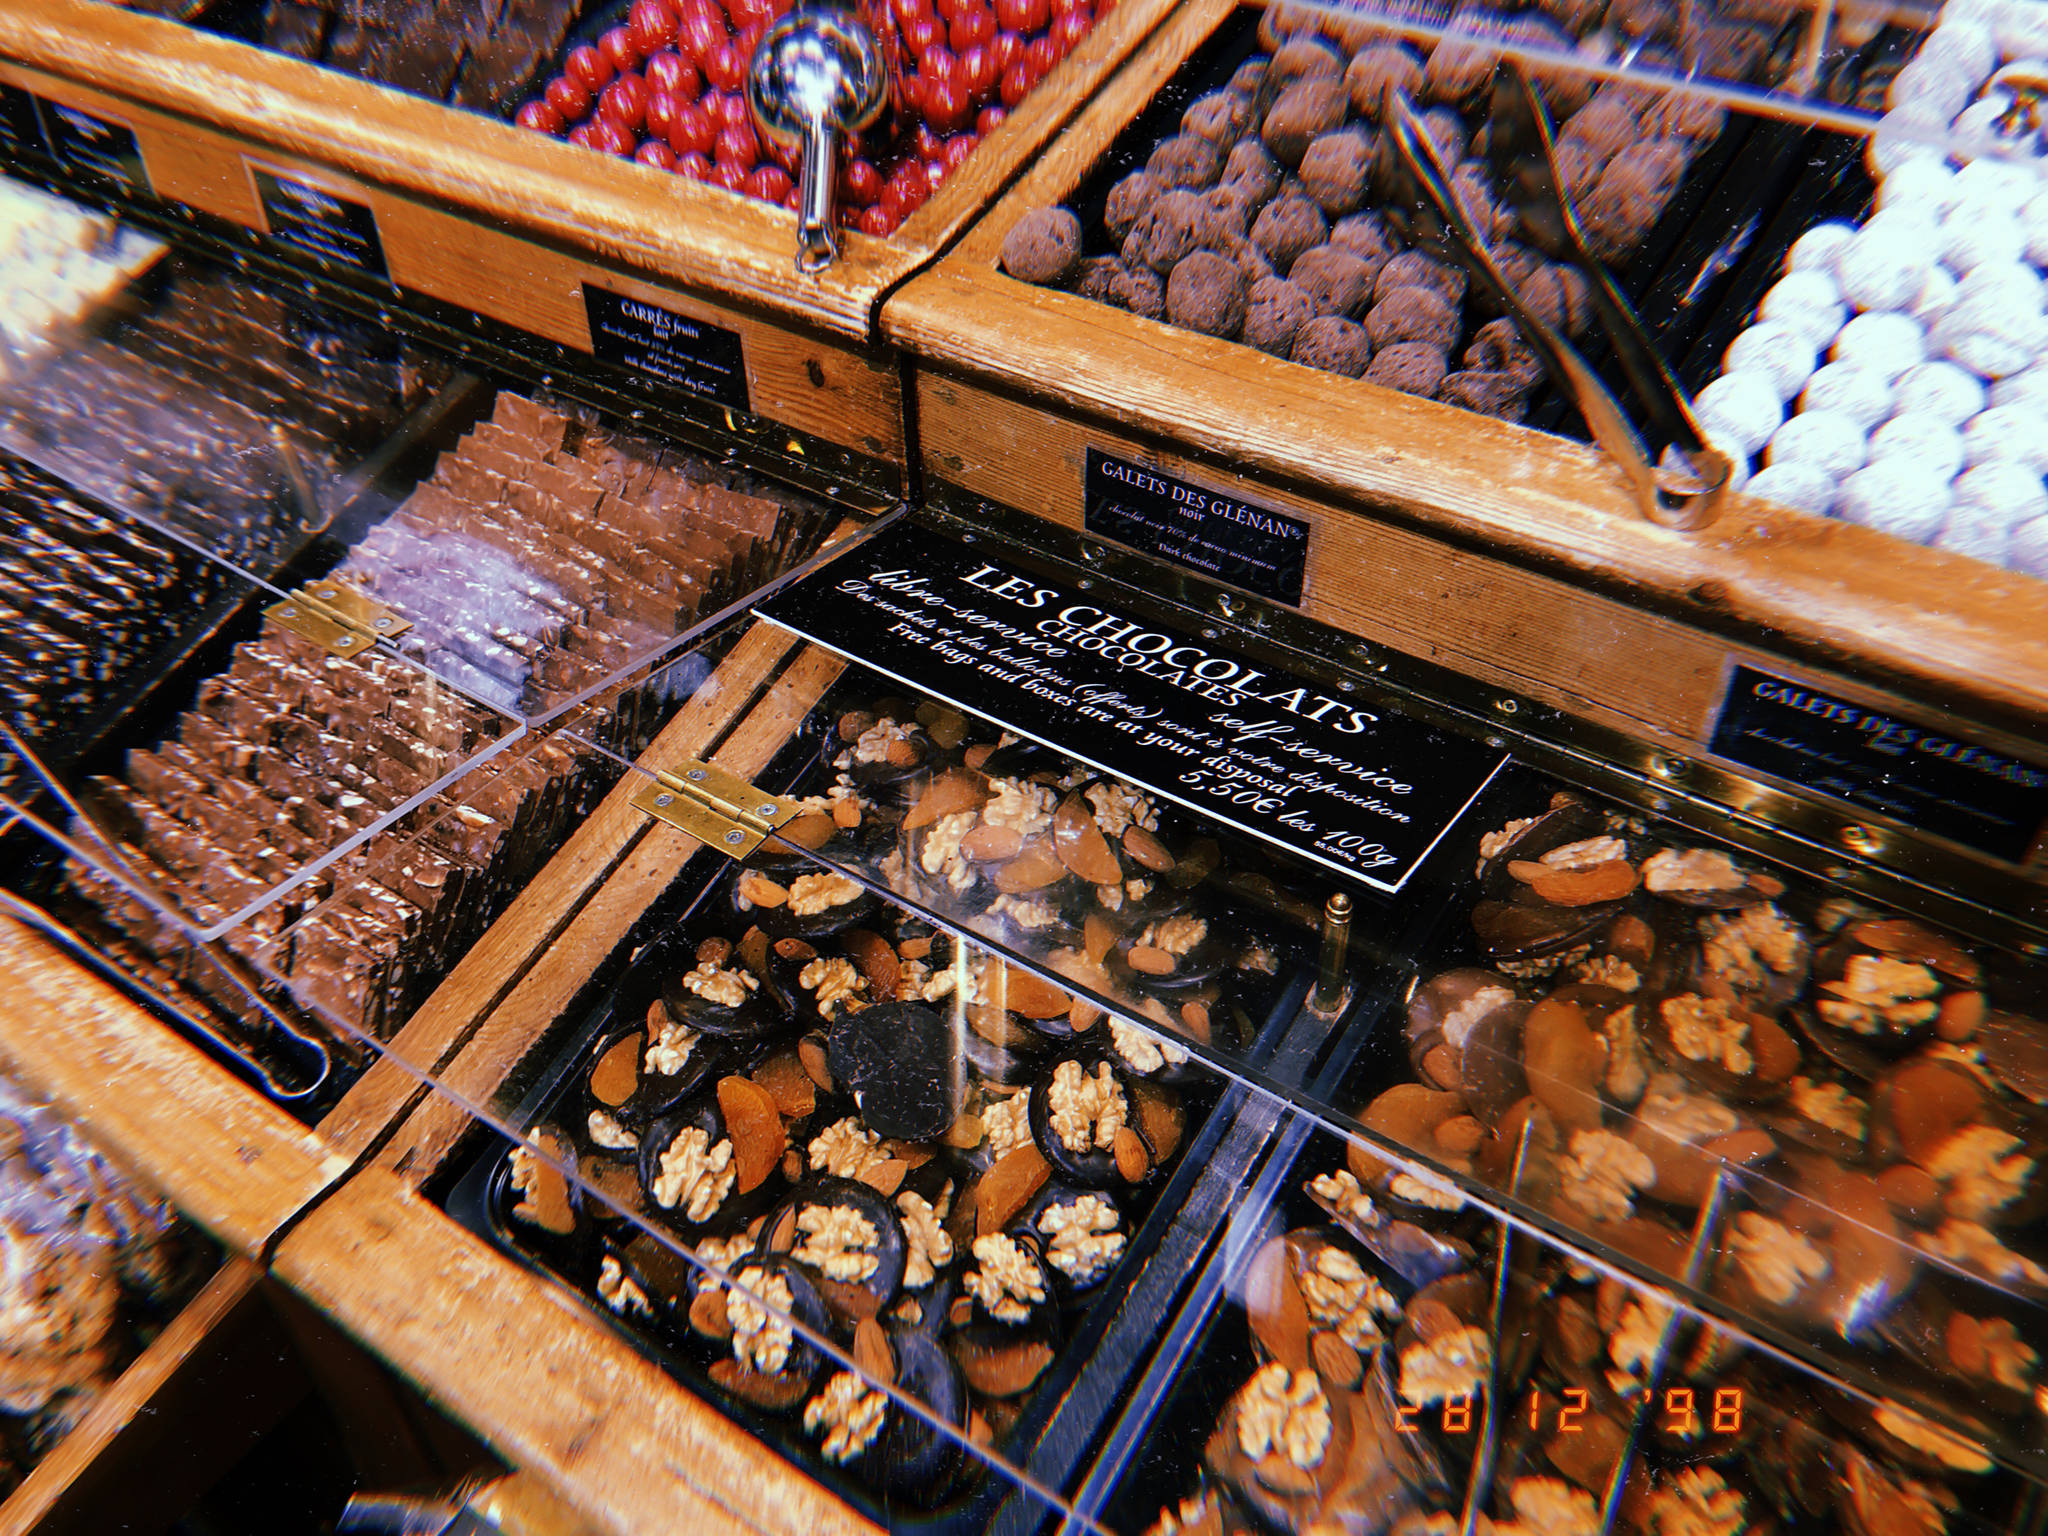 Variety of chocolates in a store I found while exploring Nantes on Dec. 28, 2018. (Bridget McTague | For the Juneau Empire)